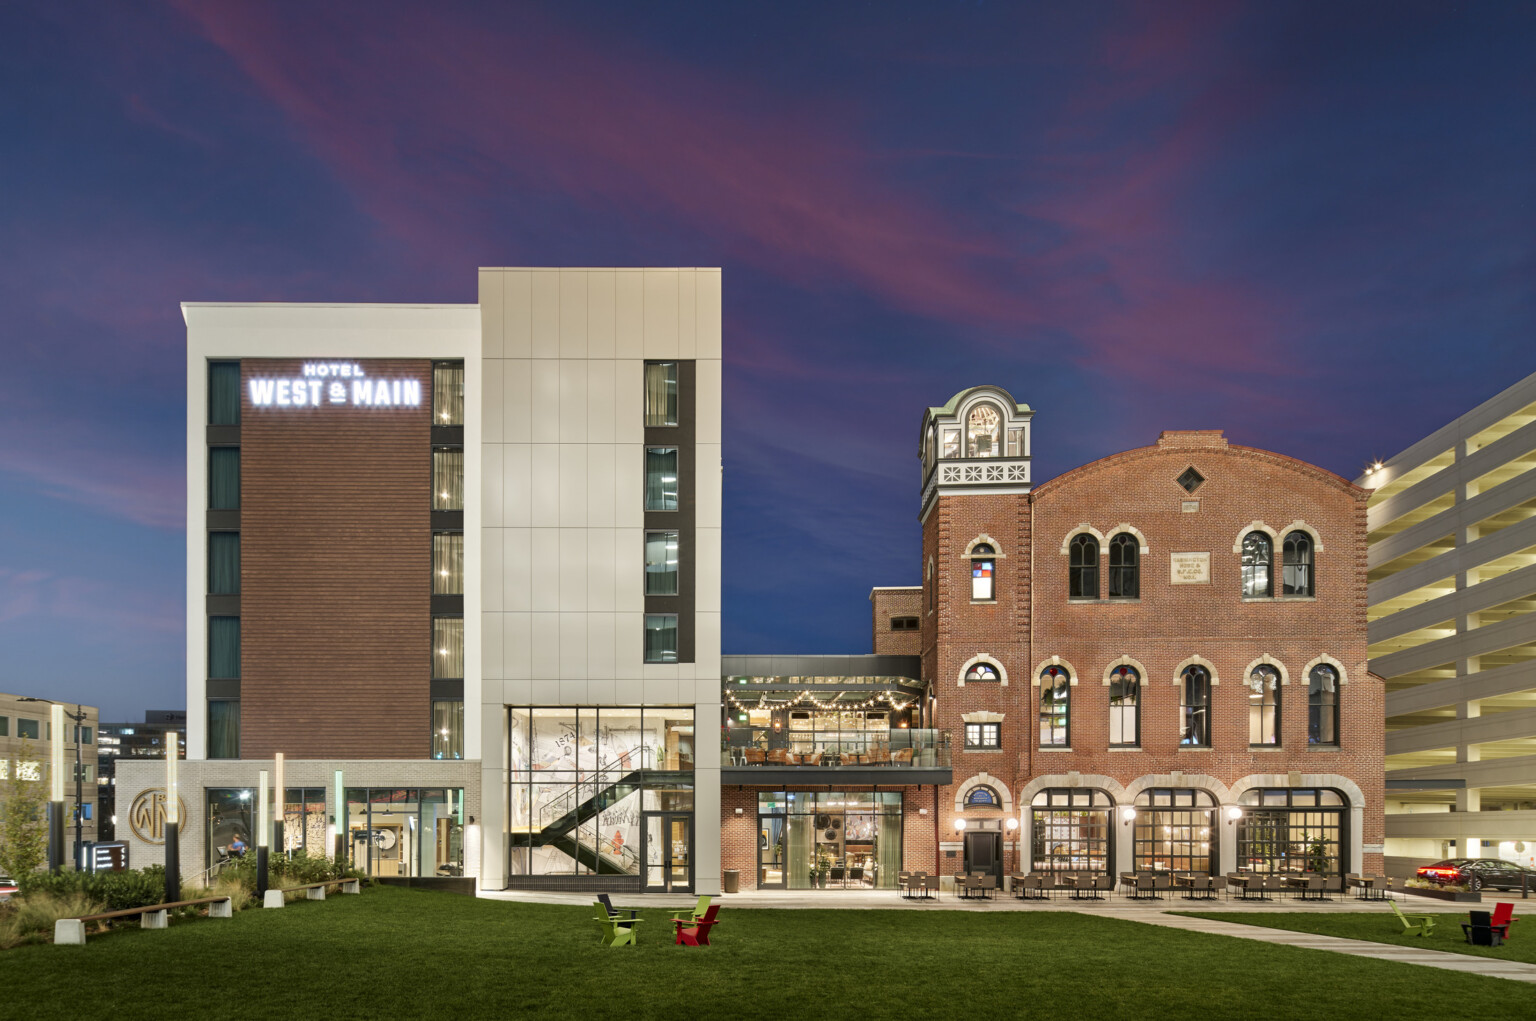 On the left, a new multi-story hotel wrapped in light siding with brick accents and on the right, the former brick fire station connects to the new hotel by an enclosed structure with a rooftop balcony overlooking a lawn